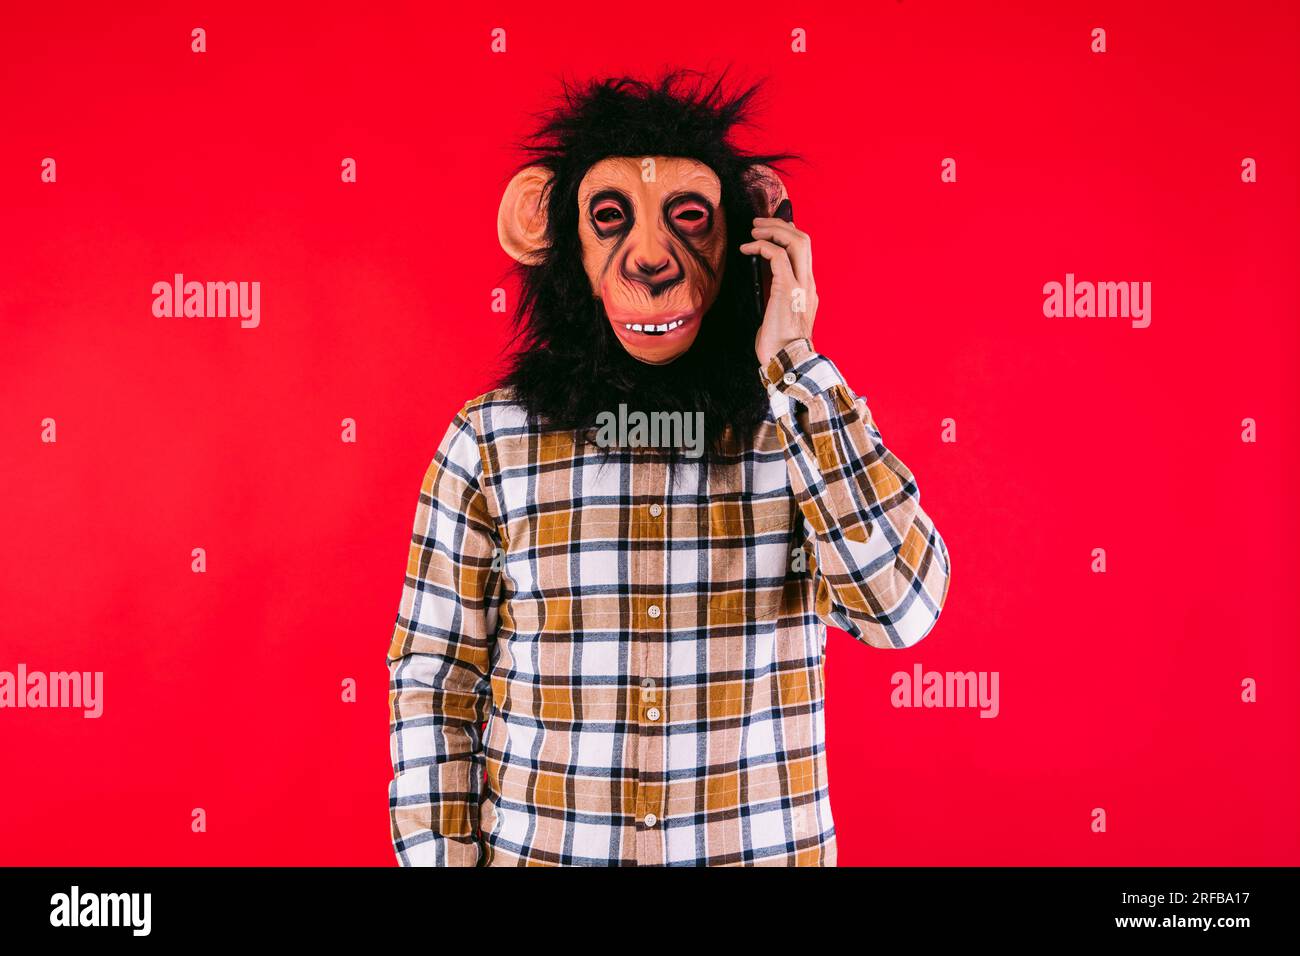 Man with chimpanzee monkey mask and checkered shirt, talking on his mobile phone or smartphone, on red background. Stock Photo